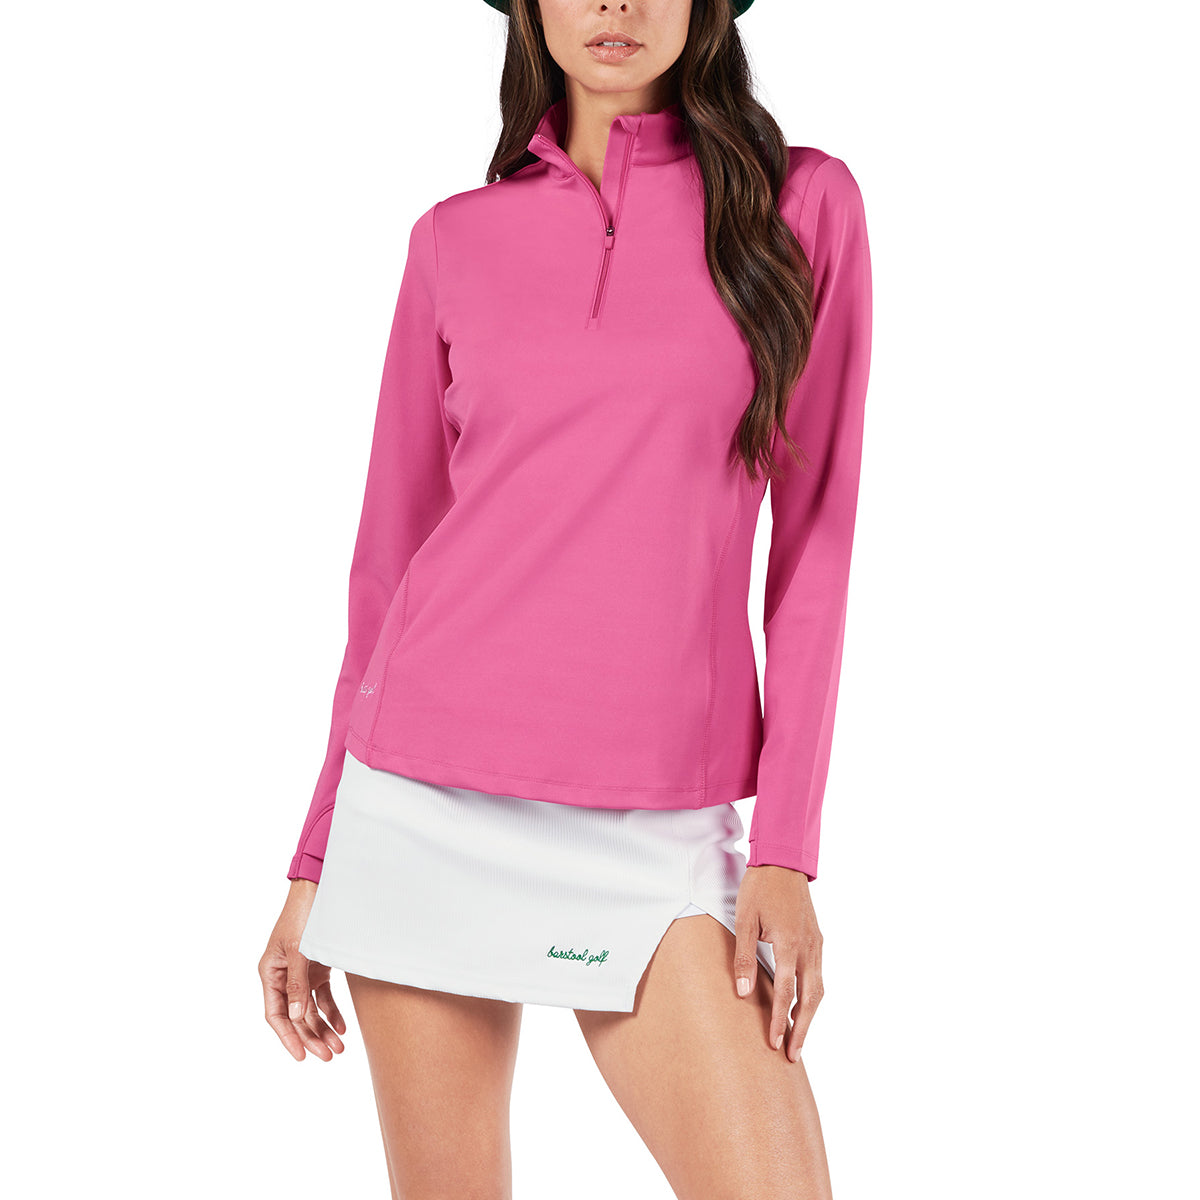 Barstool Golf Women's Quarter-Zip-Pullovers-Fore Play-Pink-XS-Barstool Sports